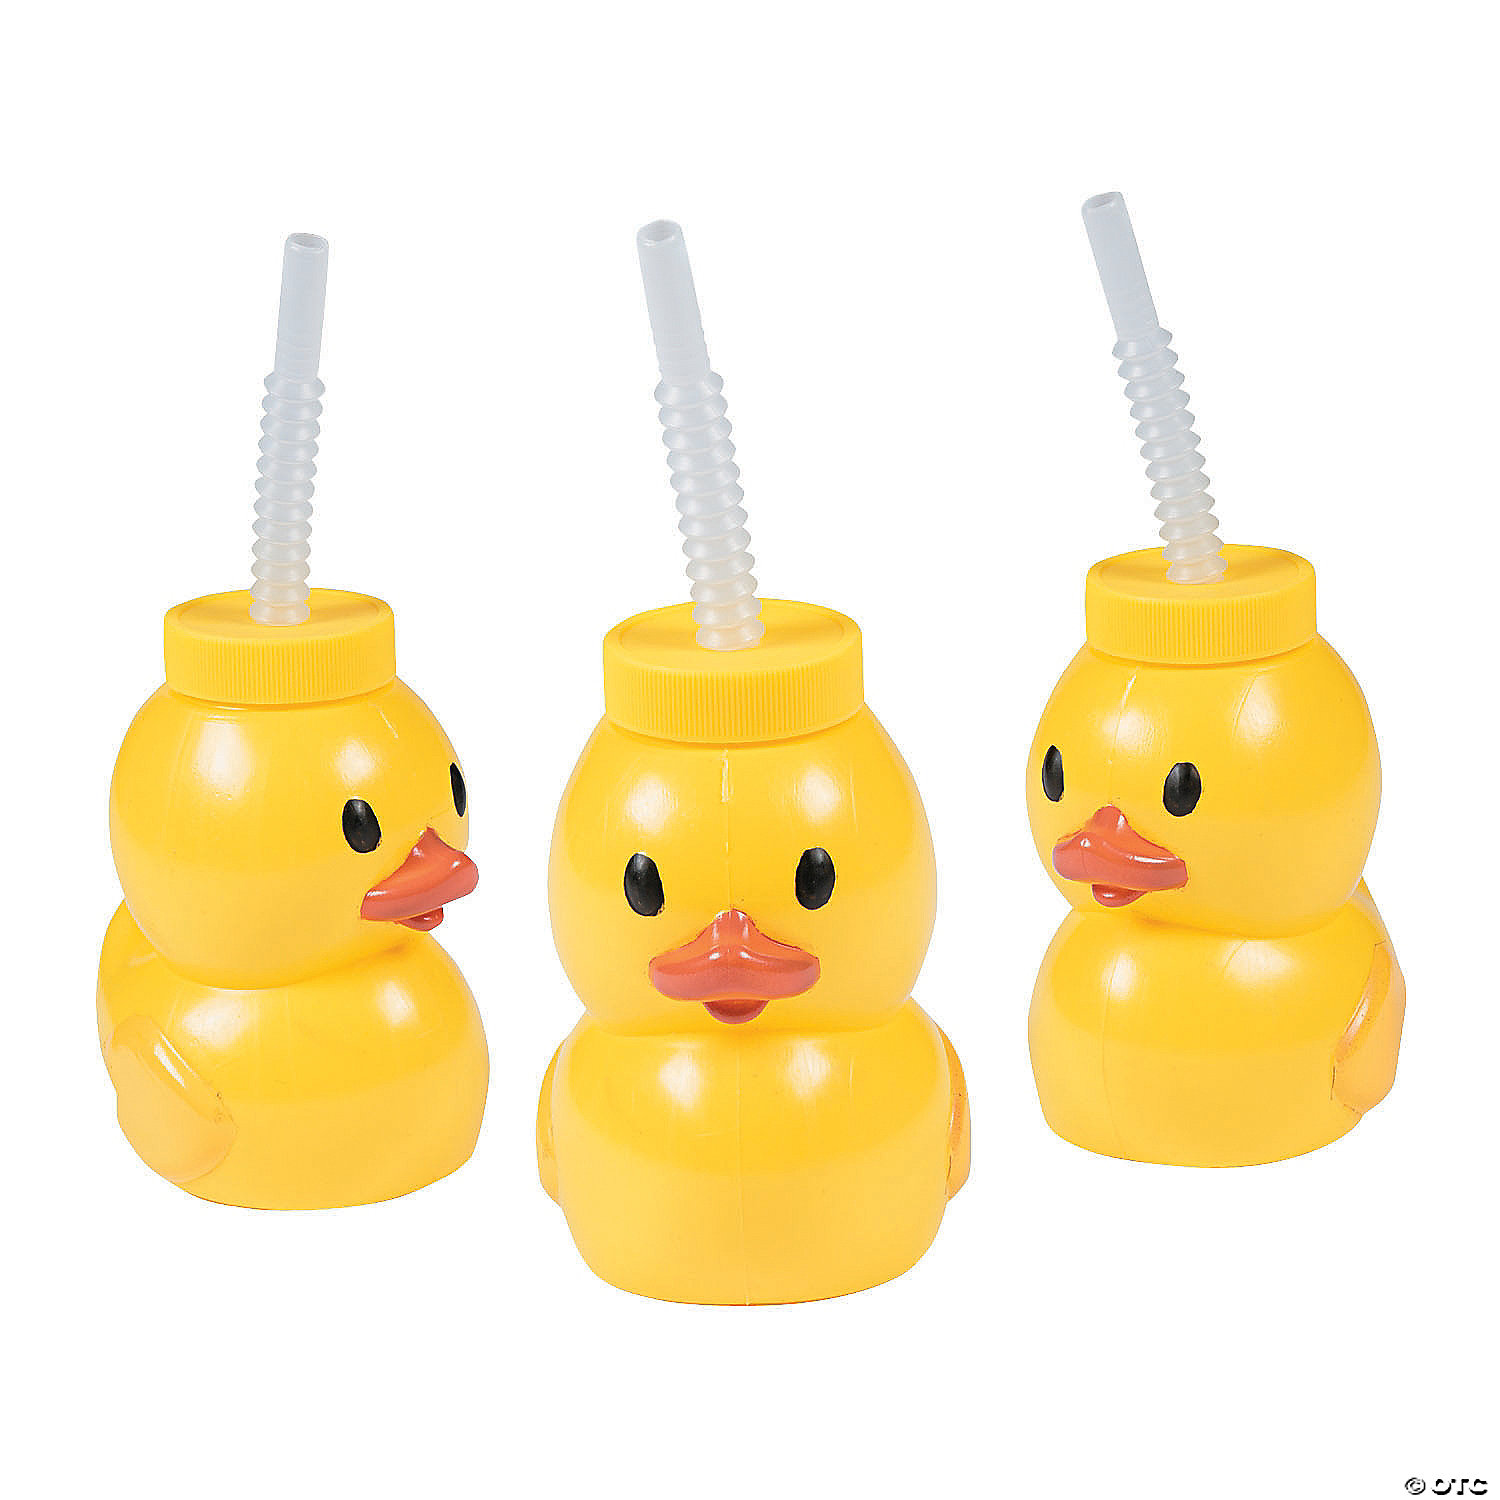 Rubber Duck Starbucks Reusable Hot Cup STOPPER Seals Into Cup Lid